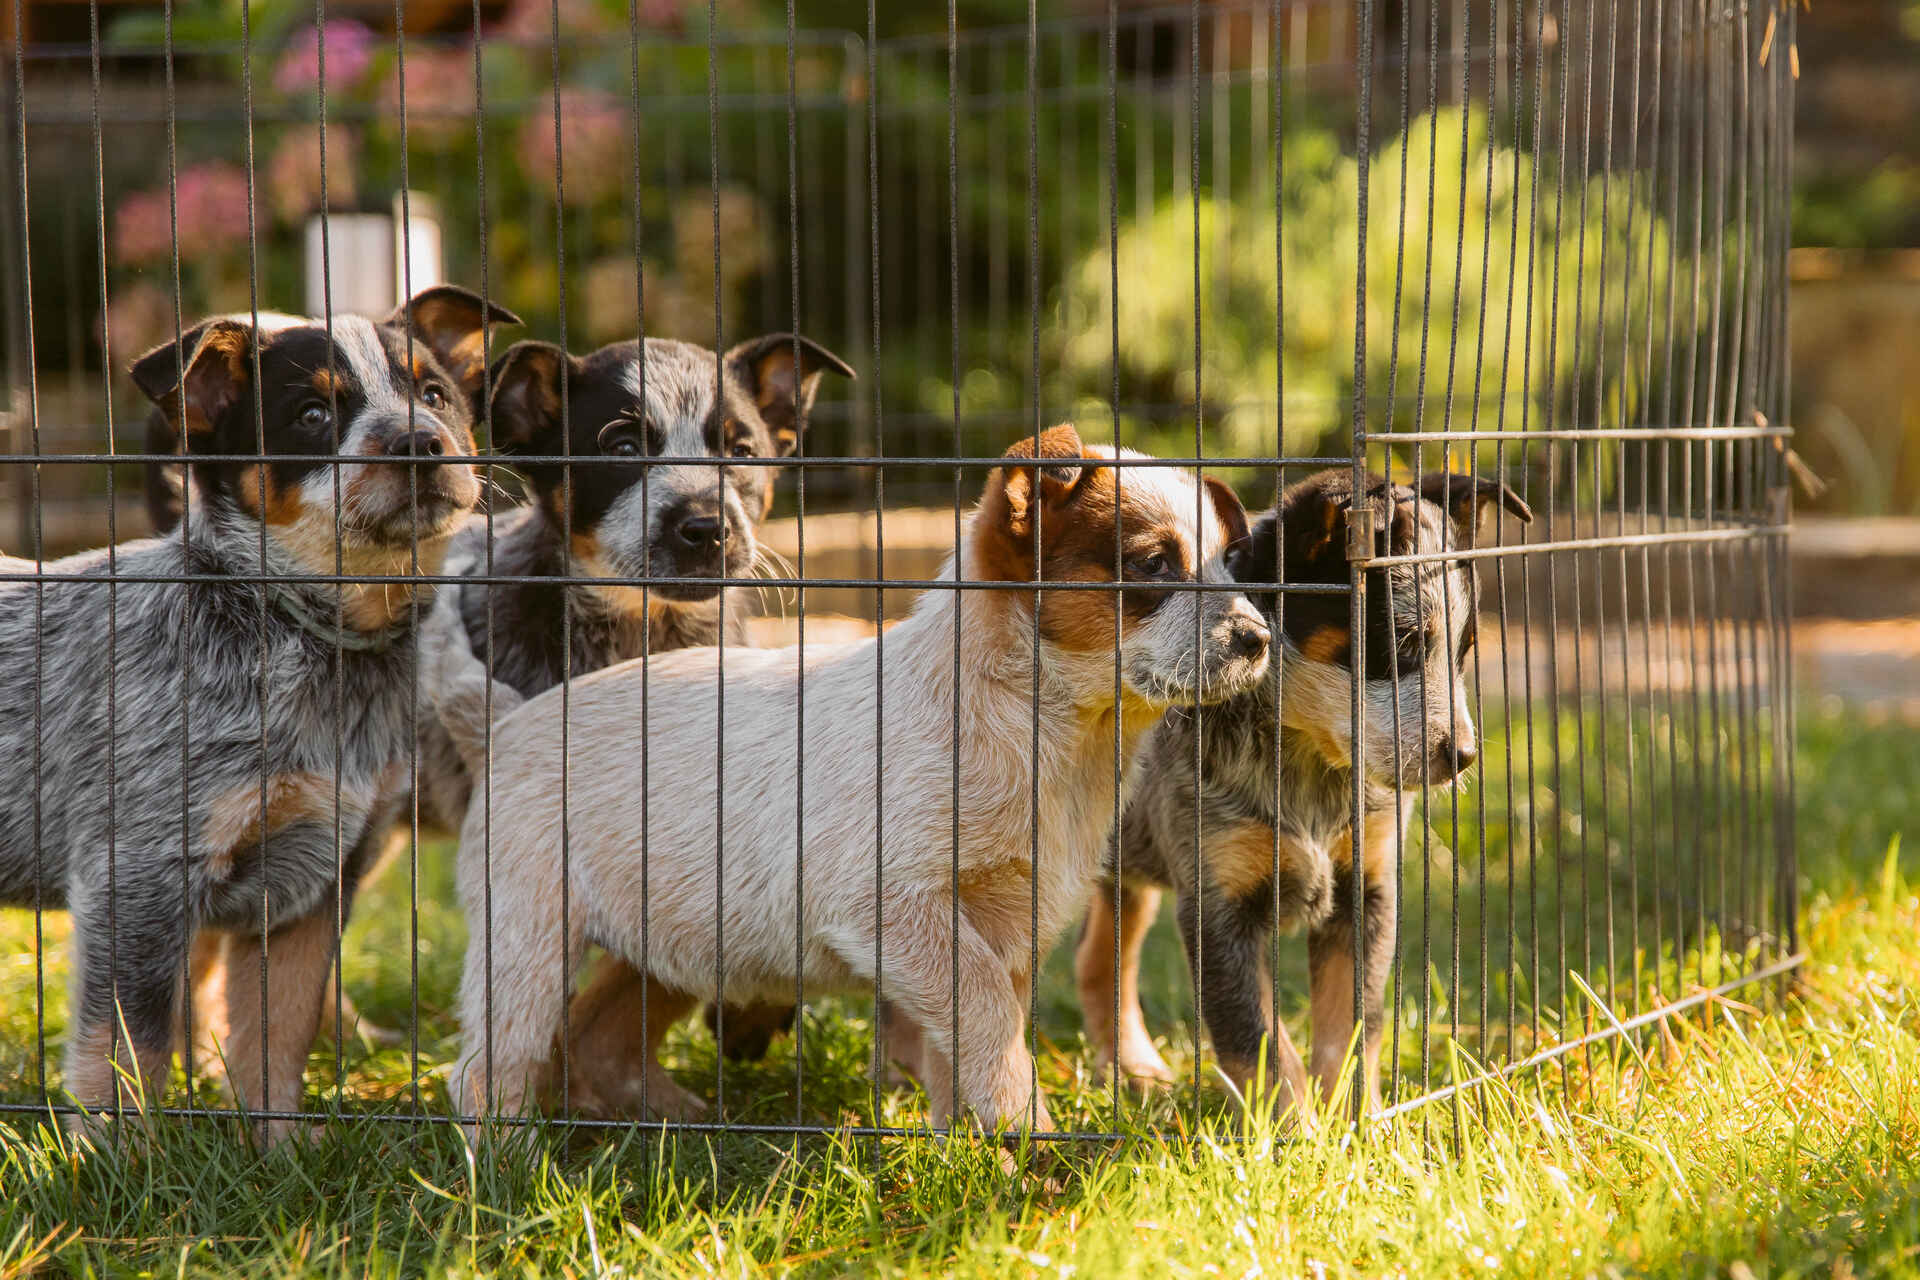 Puppies at a kennel looking outward from their cage